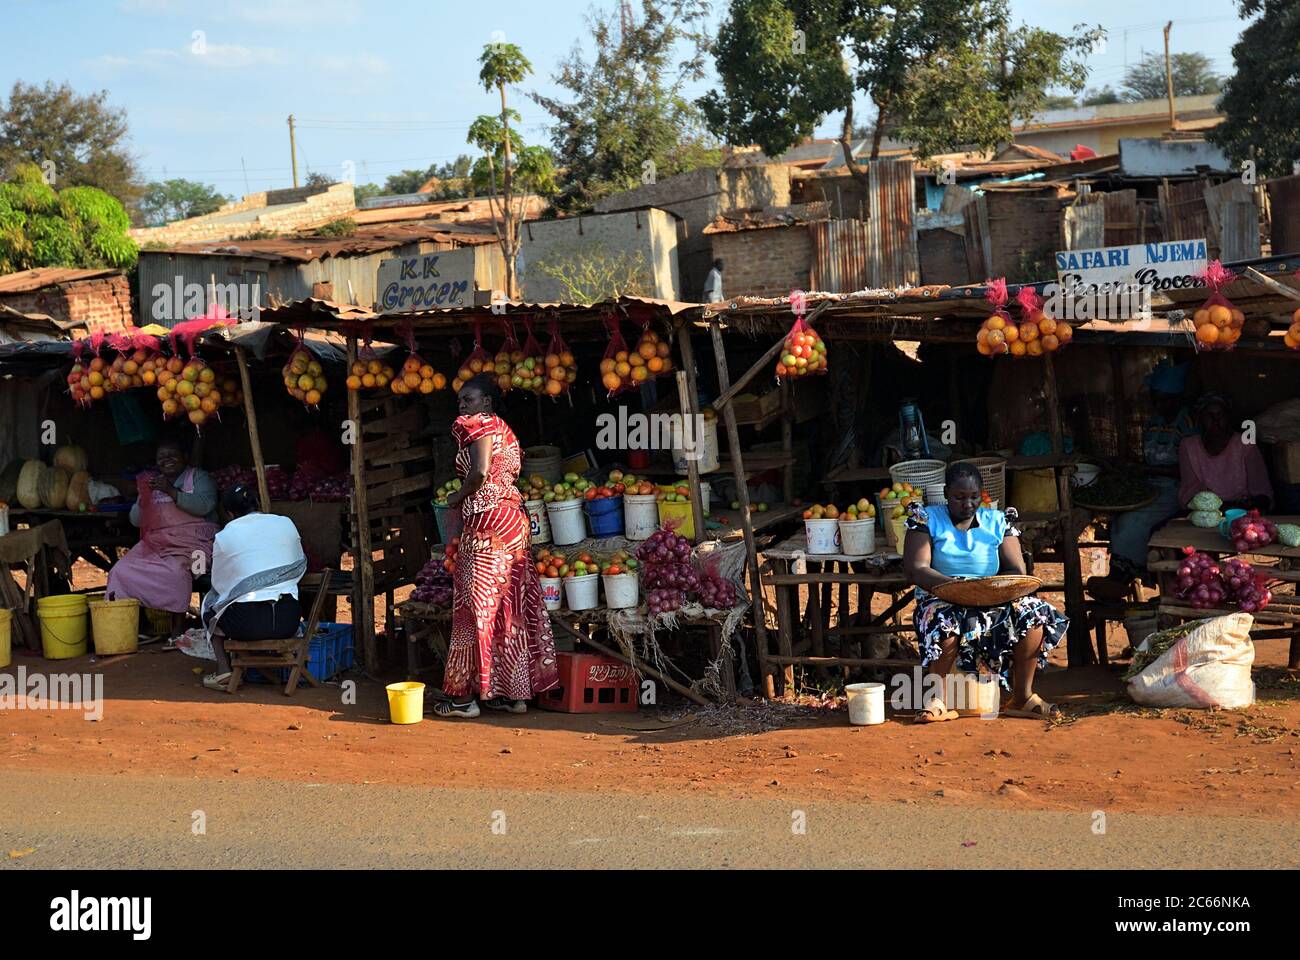 Kenya, Africa - August 22, 2010: Local people sell a farmer product and other goods on the rural market in slum along the road nearby Nairobi Stock Photo